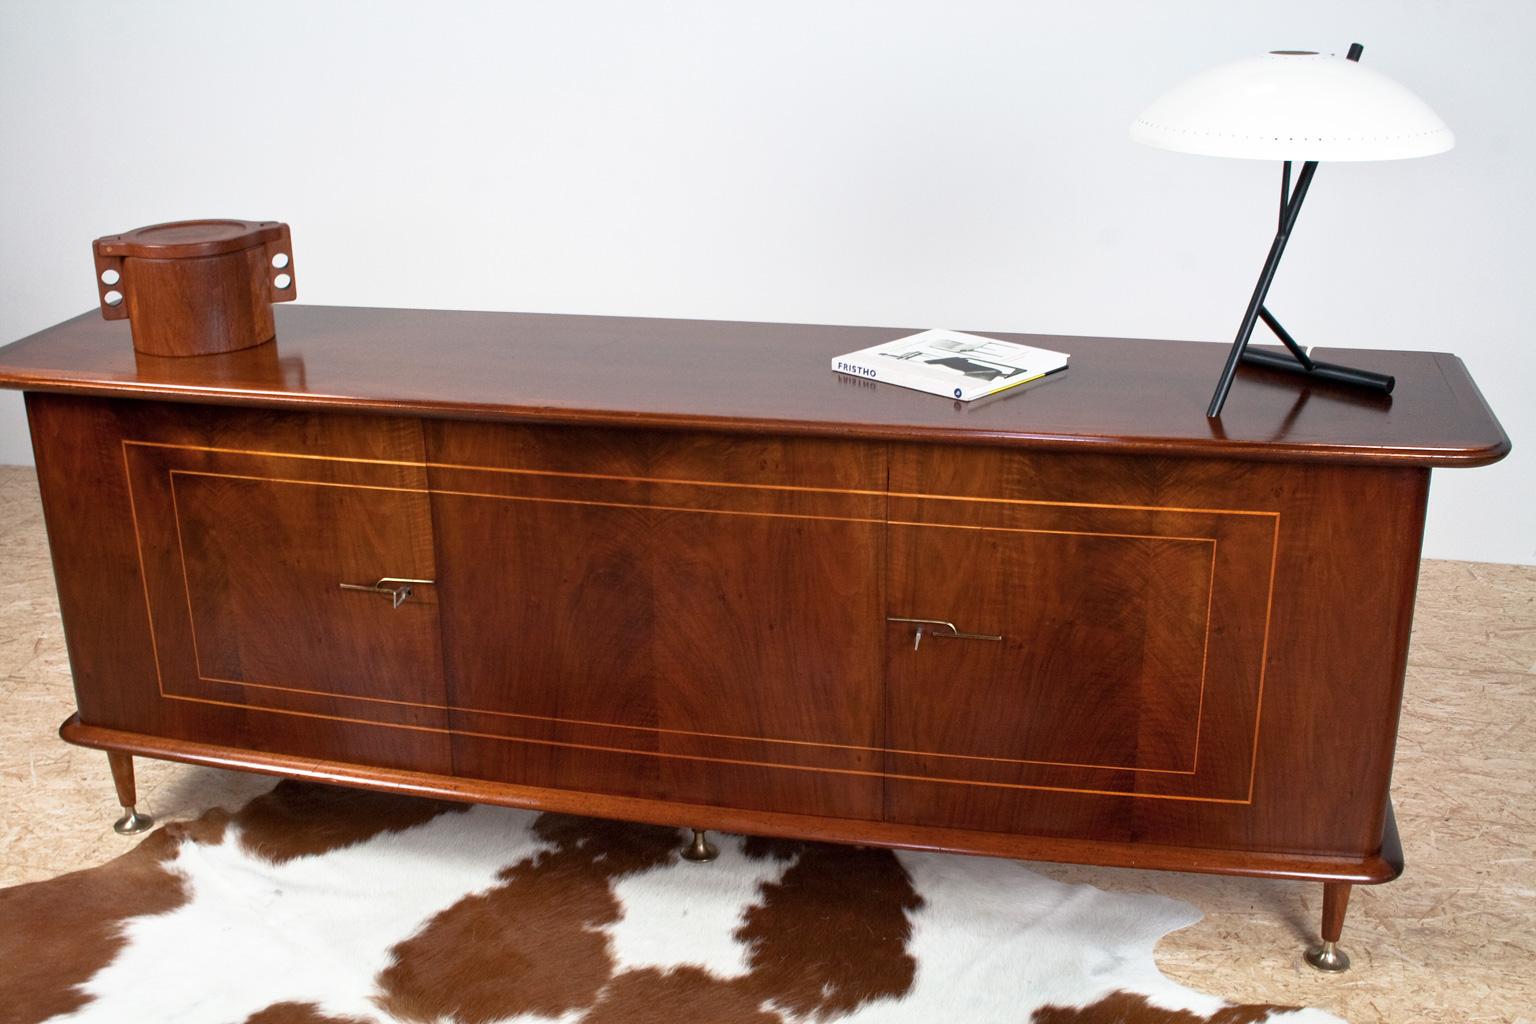 Dutch Large Art Deco Sideboard in Mahogany, Walnut and Brass by Abraham Patijn, 1950s